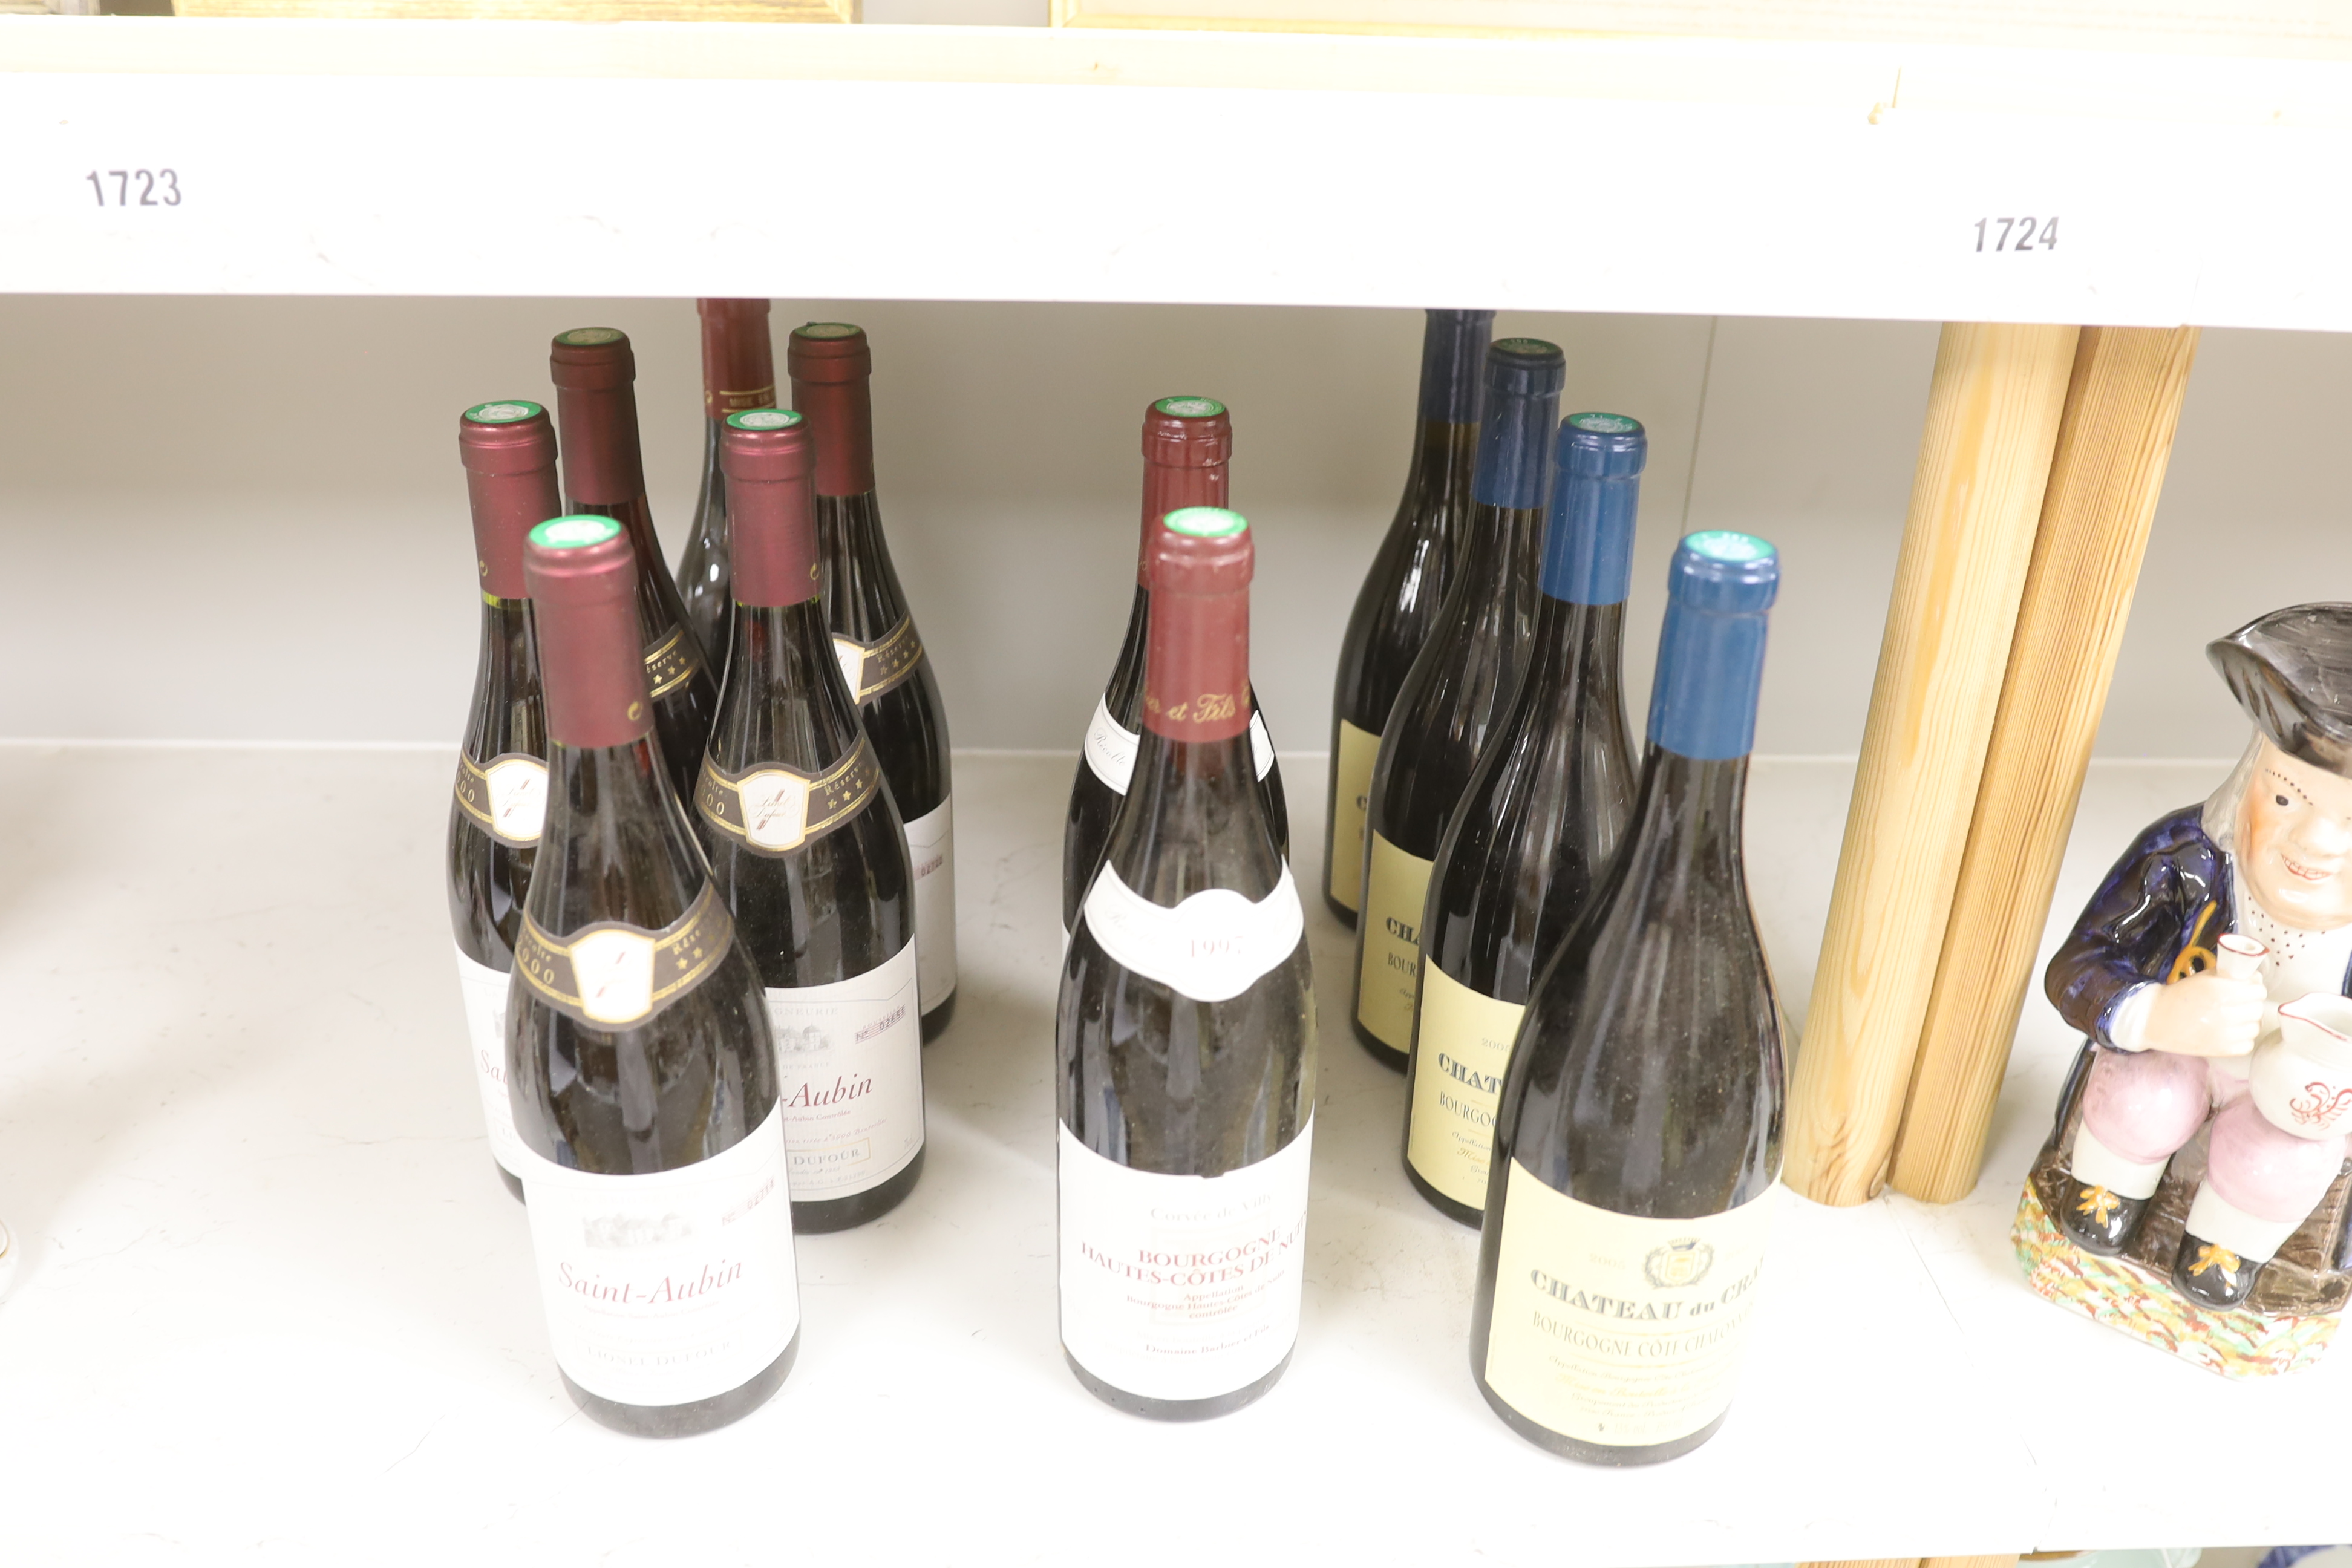 Twelve bottles of French red wine, including; four bottles of Chateau du Cray 2005, two bottles of Bourgogne Hautes-Cotes de Nuits 1997, five bottles of Saint-Aubin 2000 and a bottle of Moulin a Vent 1999